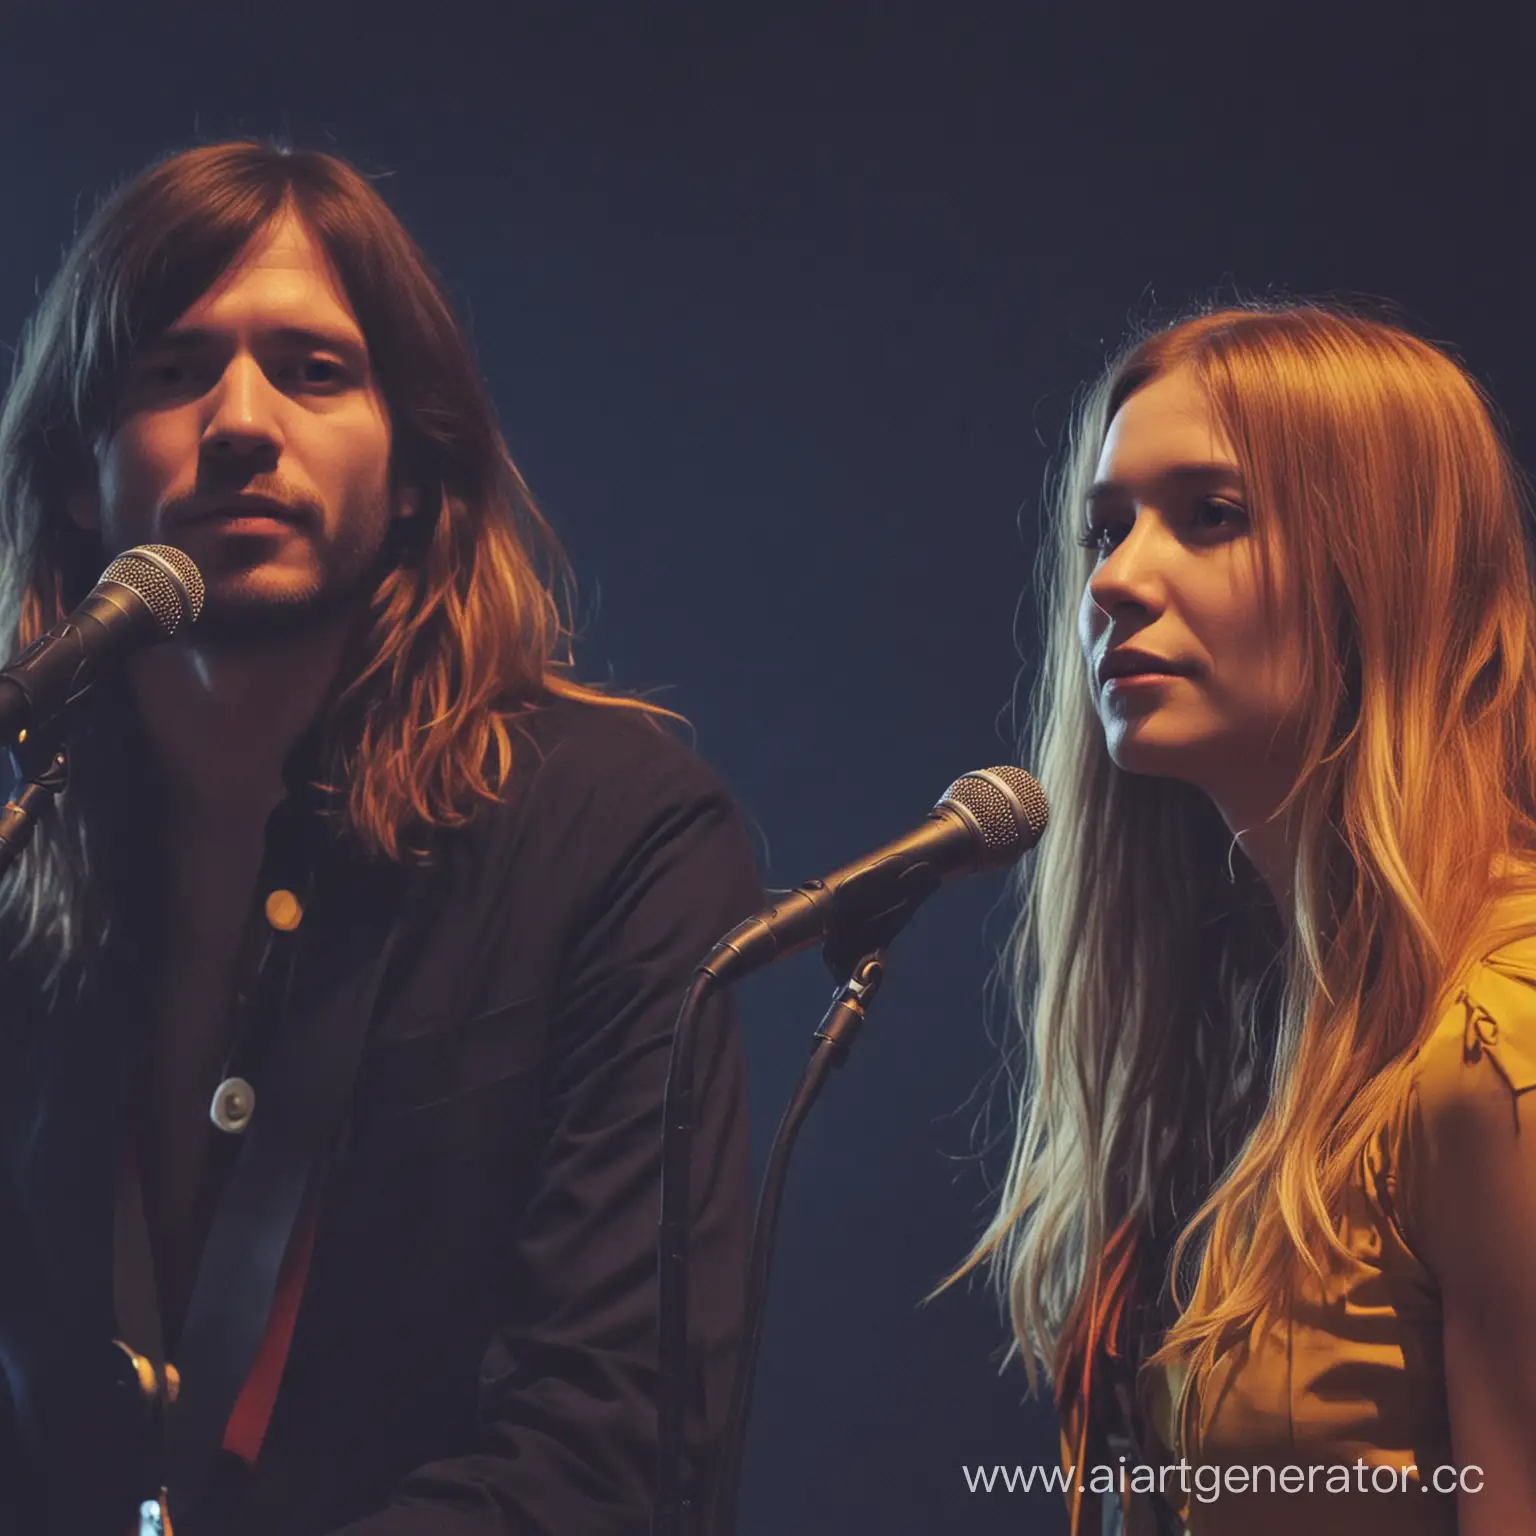 Perfomance of 2 members of music band "Still corners" man and woman with dark blue background and red, yellow, brown atmosphere